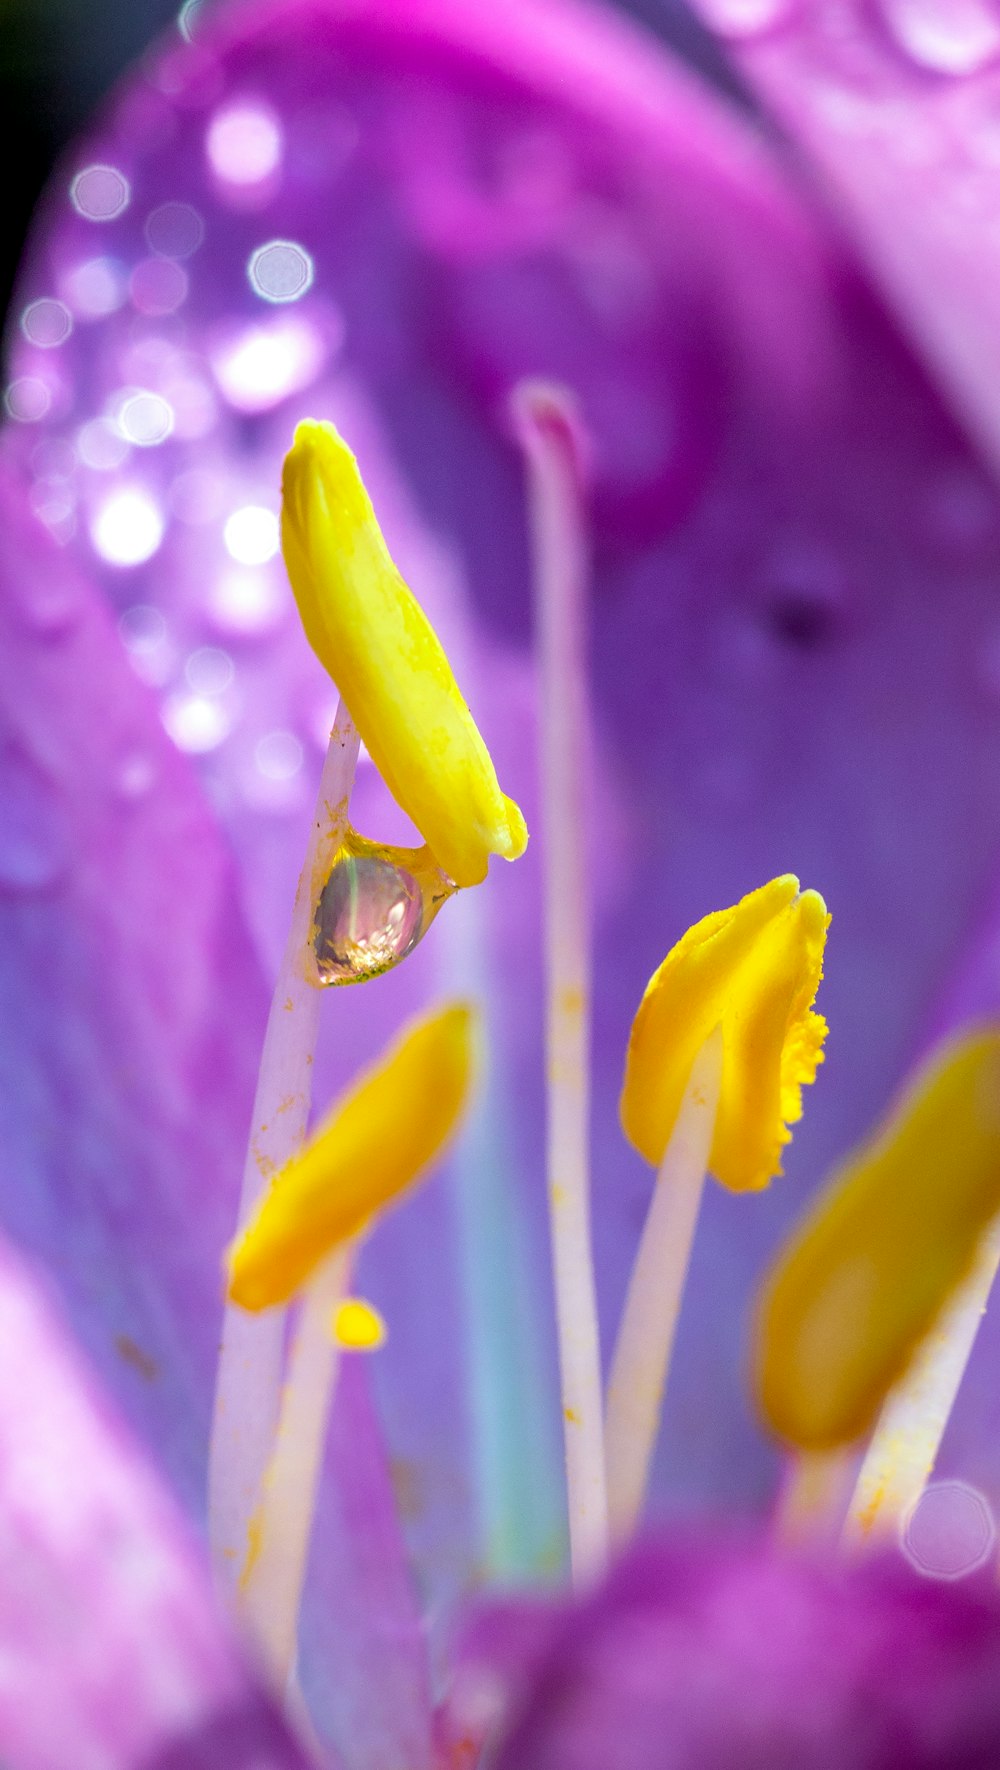 a close up of a purple flower with drops of water on it